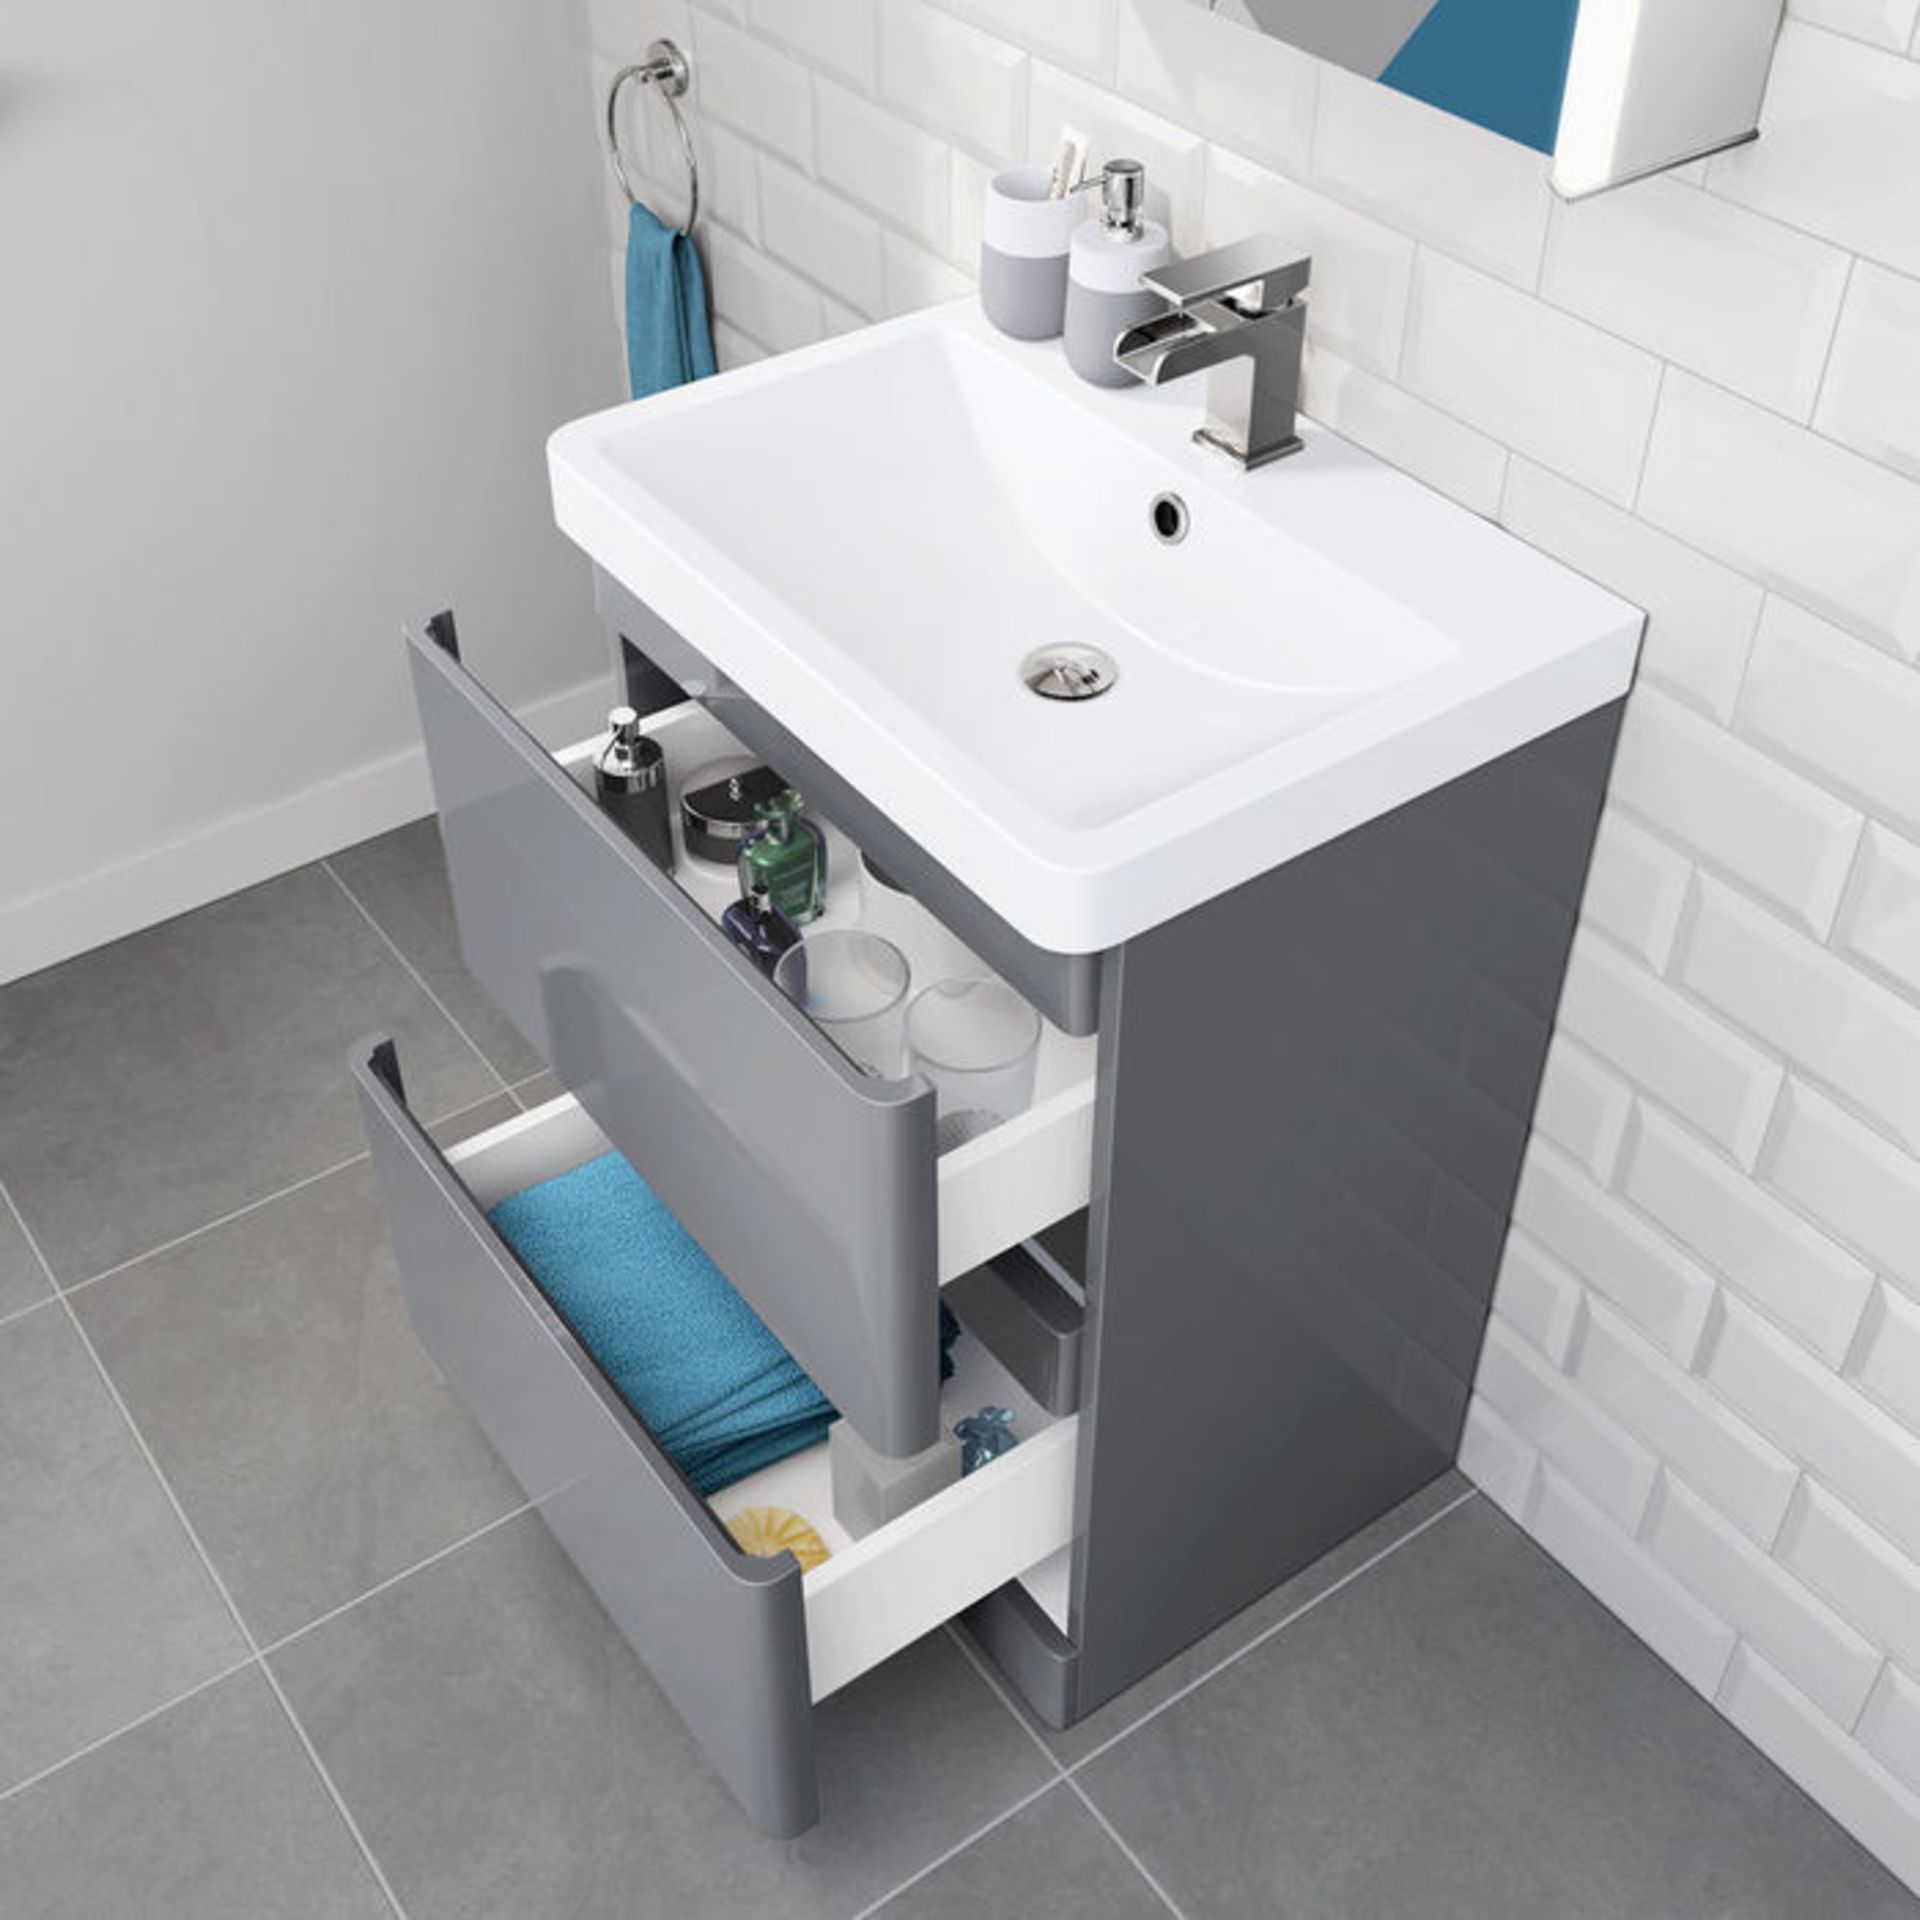 NEW & BOXED 600mm Denver Gloss Grey Built In Basin Drawer Unit - Floor Standing. RRP £499.99. - Image 2 of 4